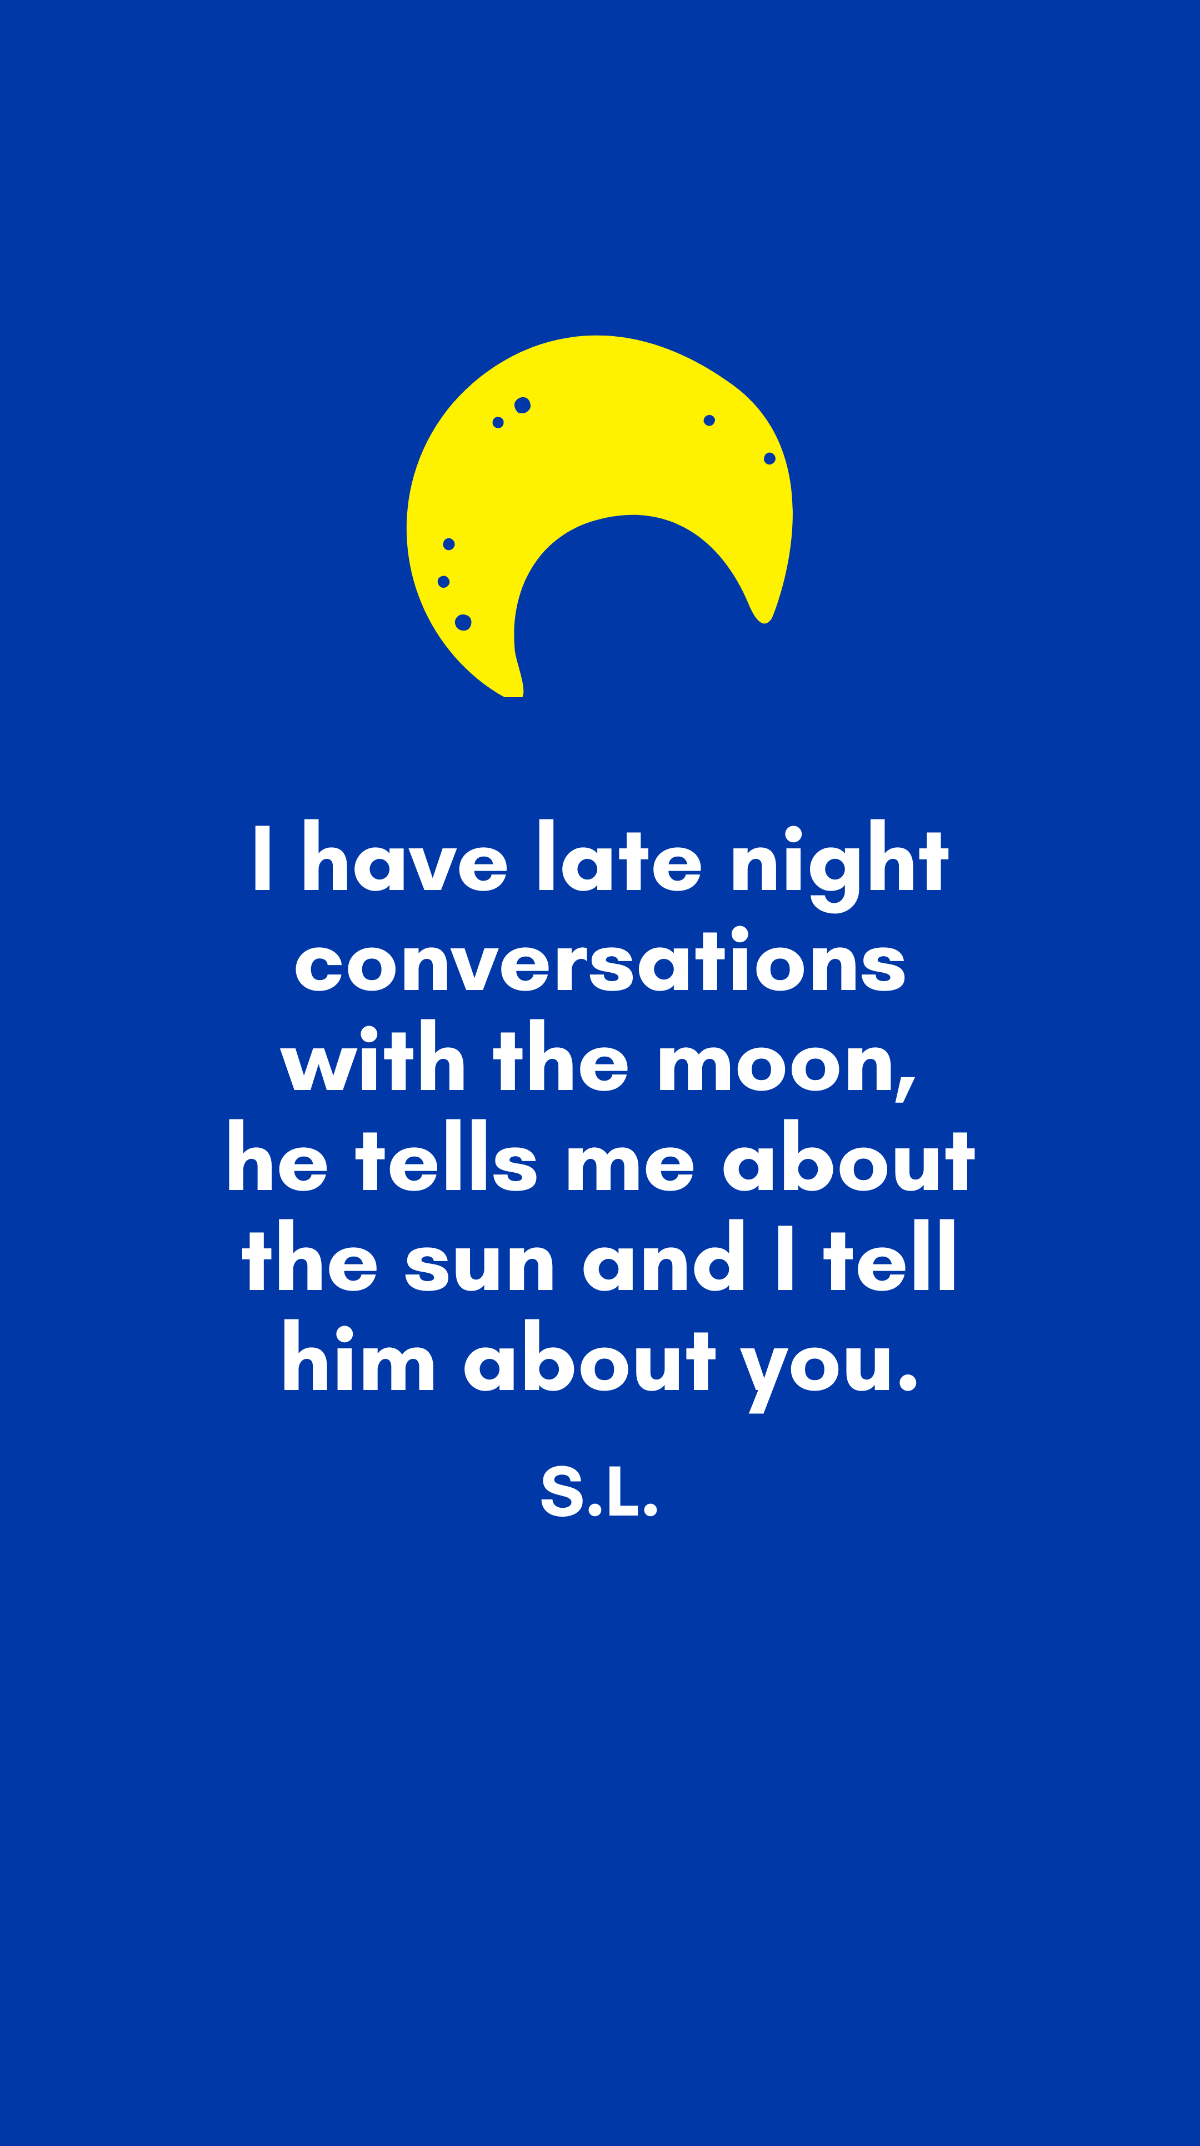 Free S.L. - I have late night conversations with the moon, he tells me about the sun and I tell him about you. Template